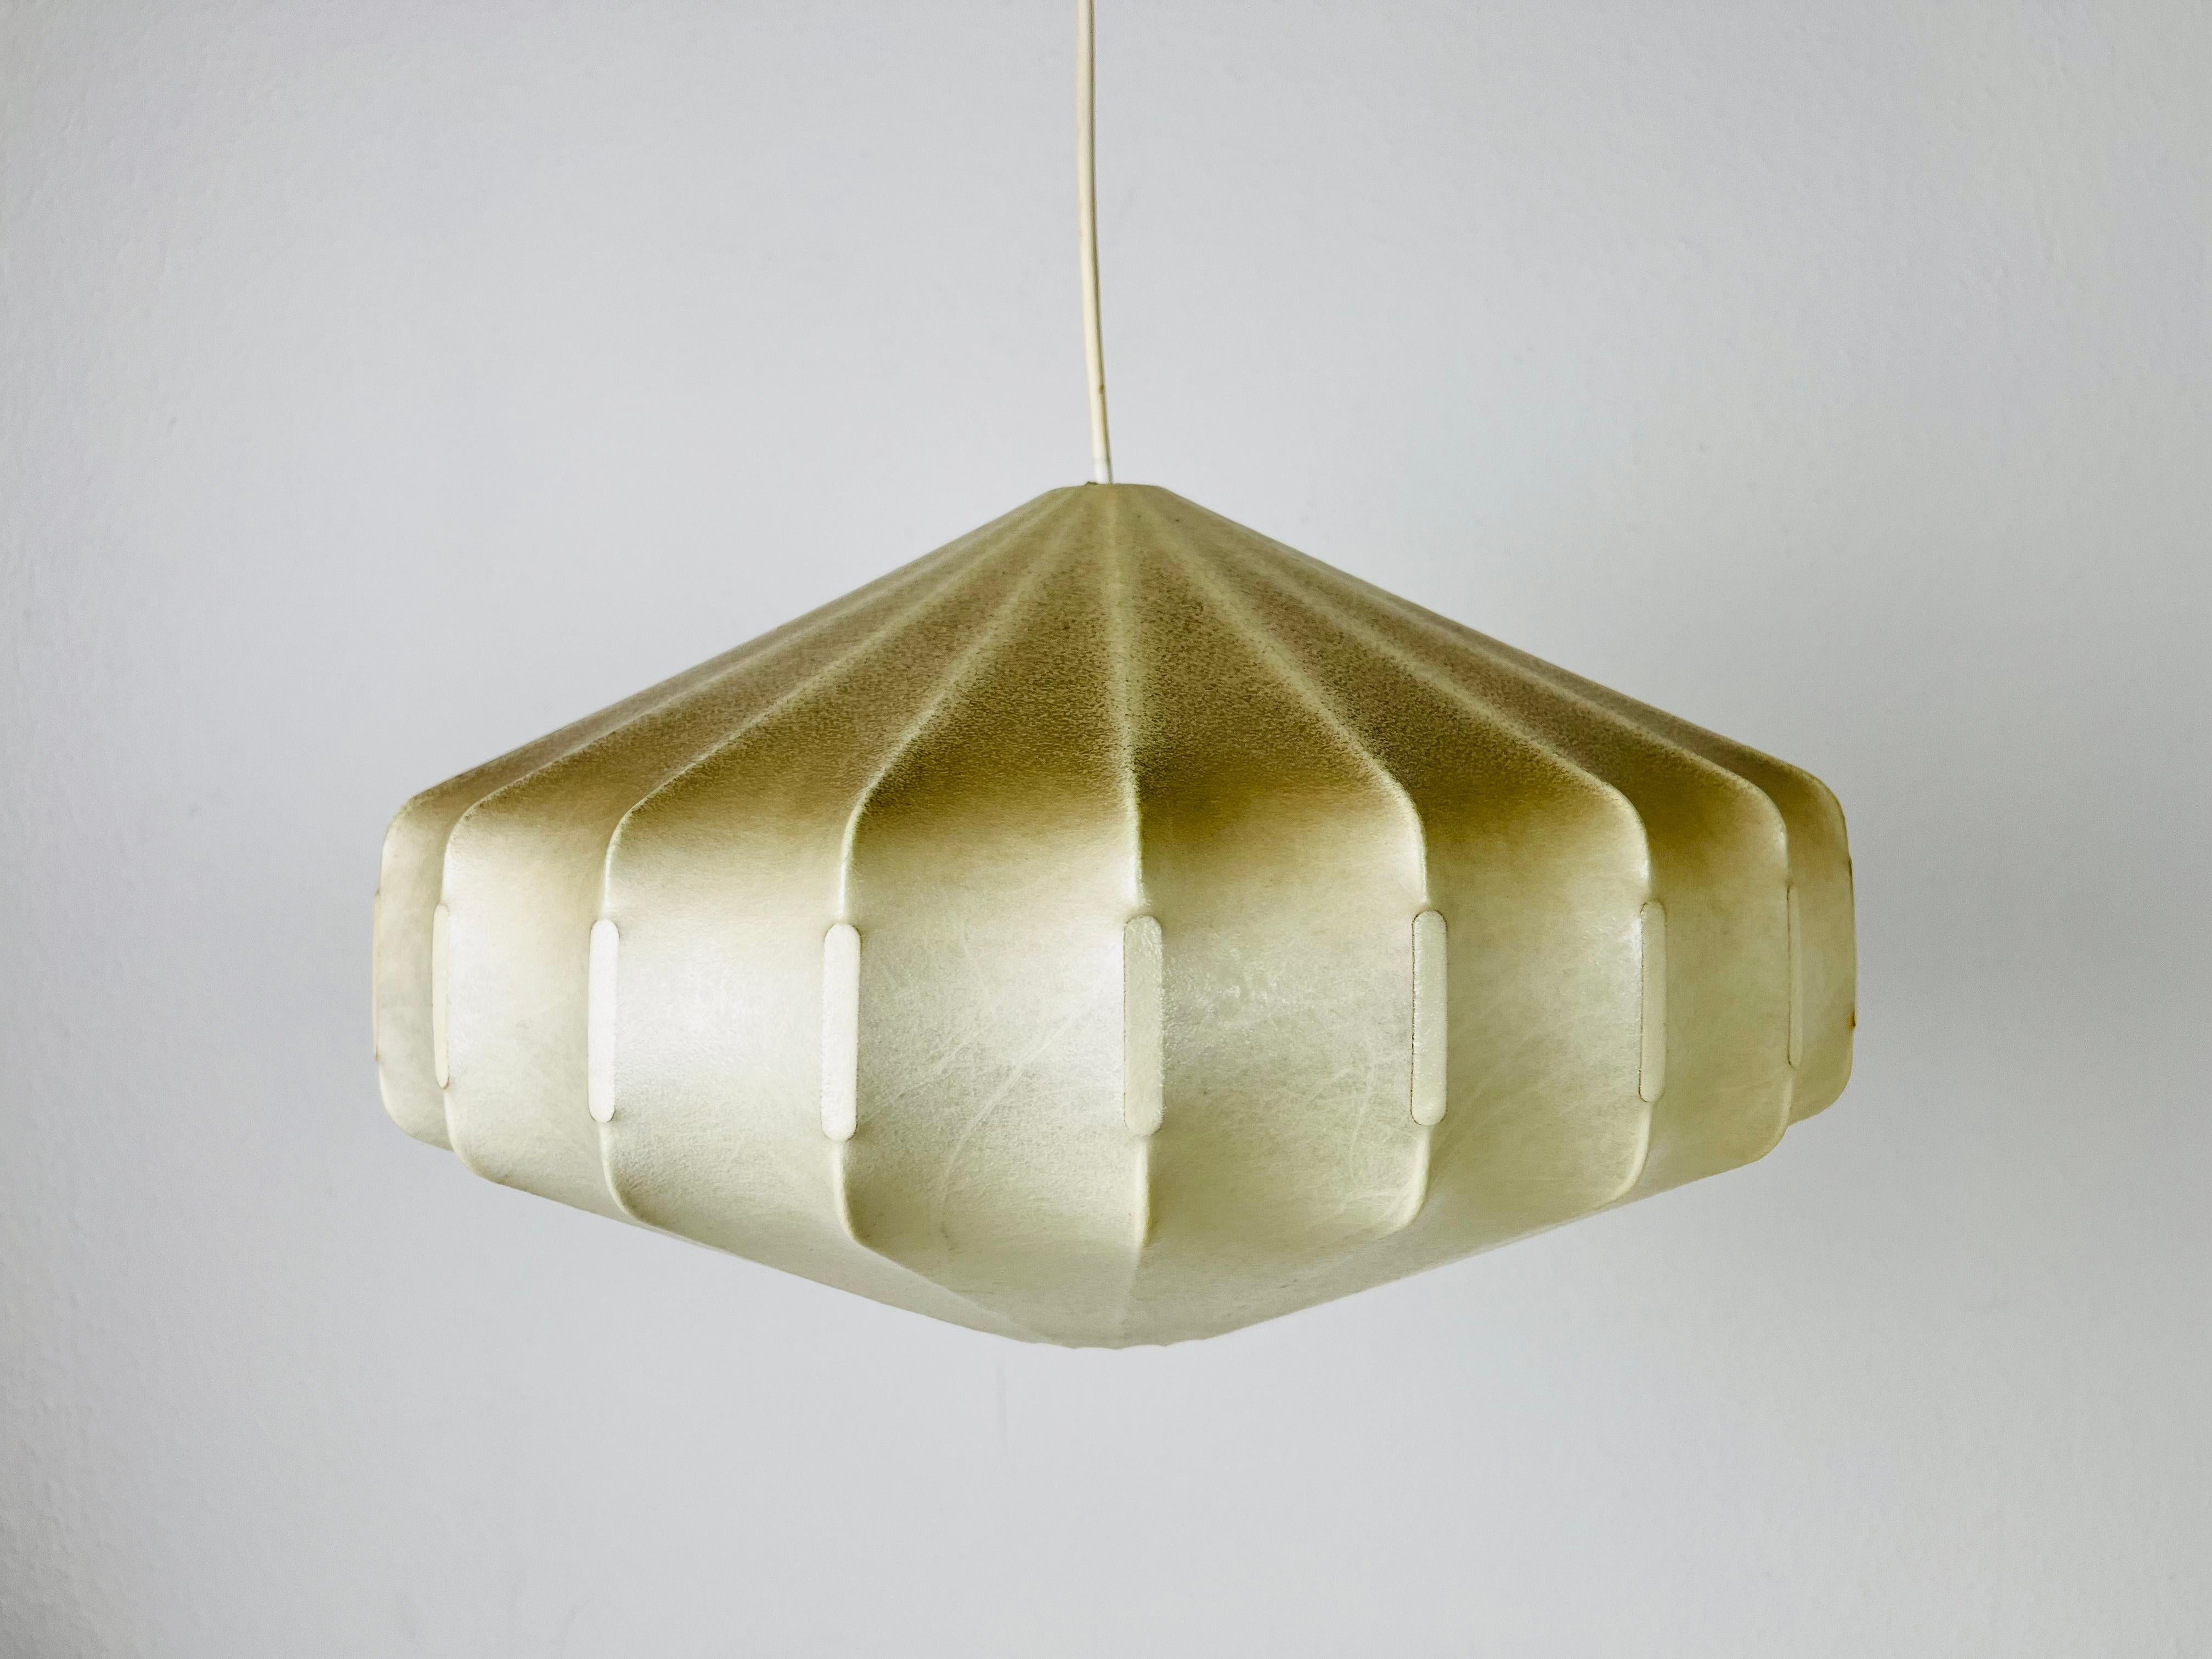 A cocoon pendant lamp made Friedel Wauer in Germany in the 1960s. The hanging lamp has a design similar to the lightings made by Achille Castiglioni. The lamp shade is made of original resin and has a losange shape.

Measurements:
Height: 25-70